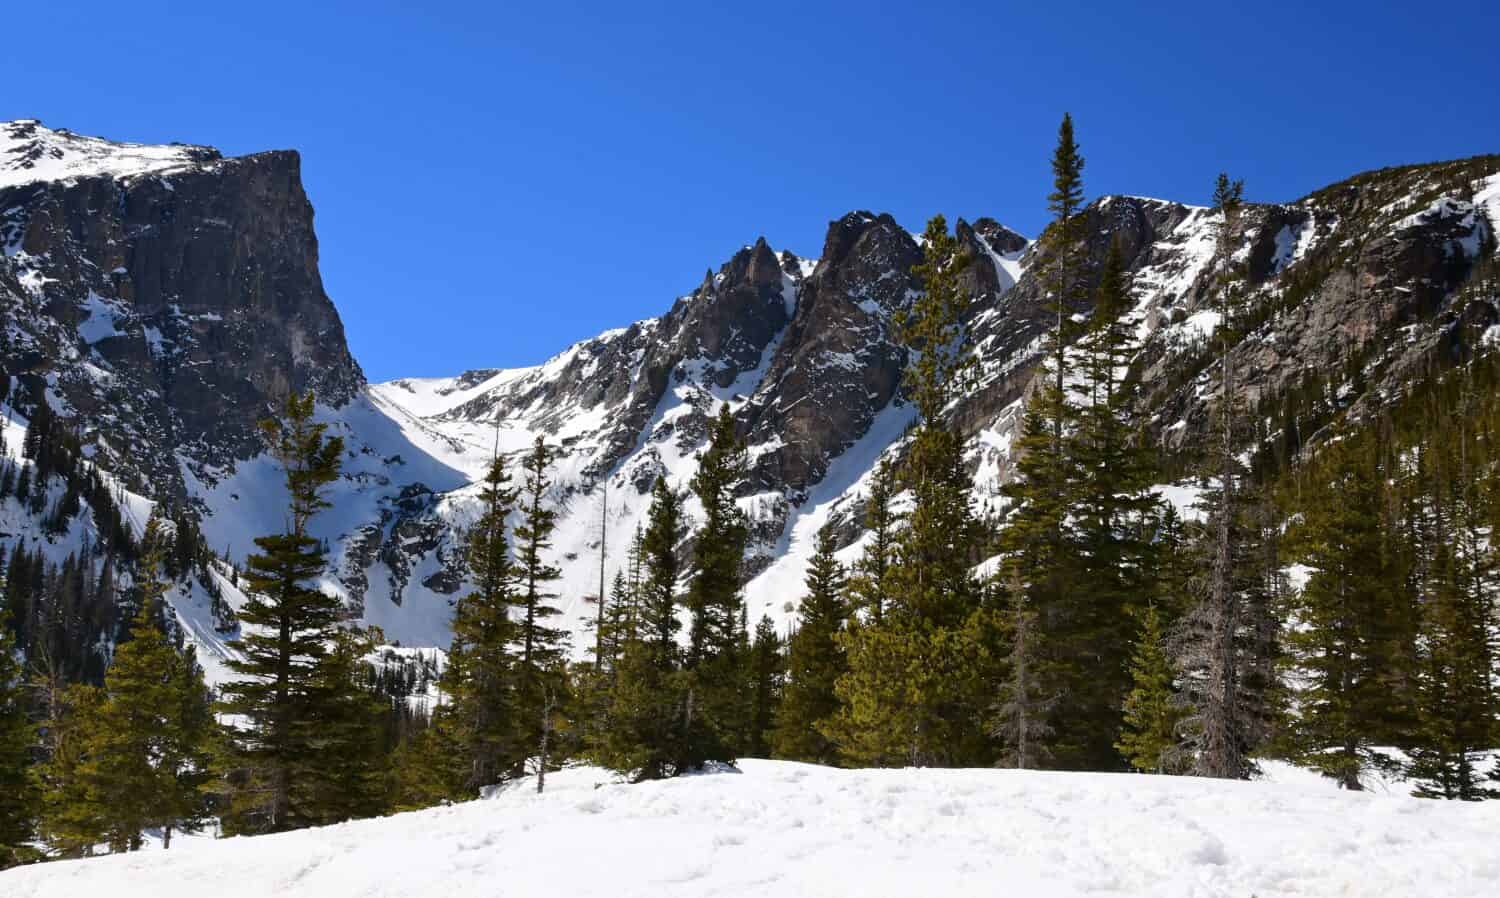 Hallett peak and flattop mountain on a sunny spring day near dream lake along the emerald lake trail in rocky mountain national park, colorado